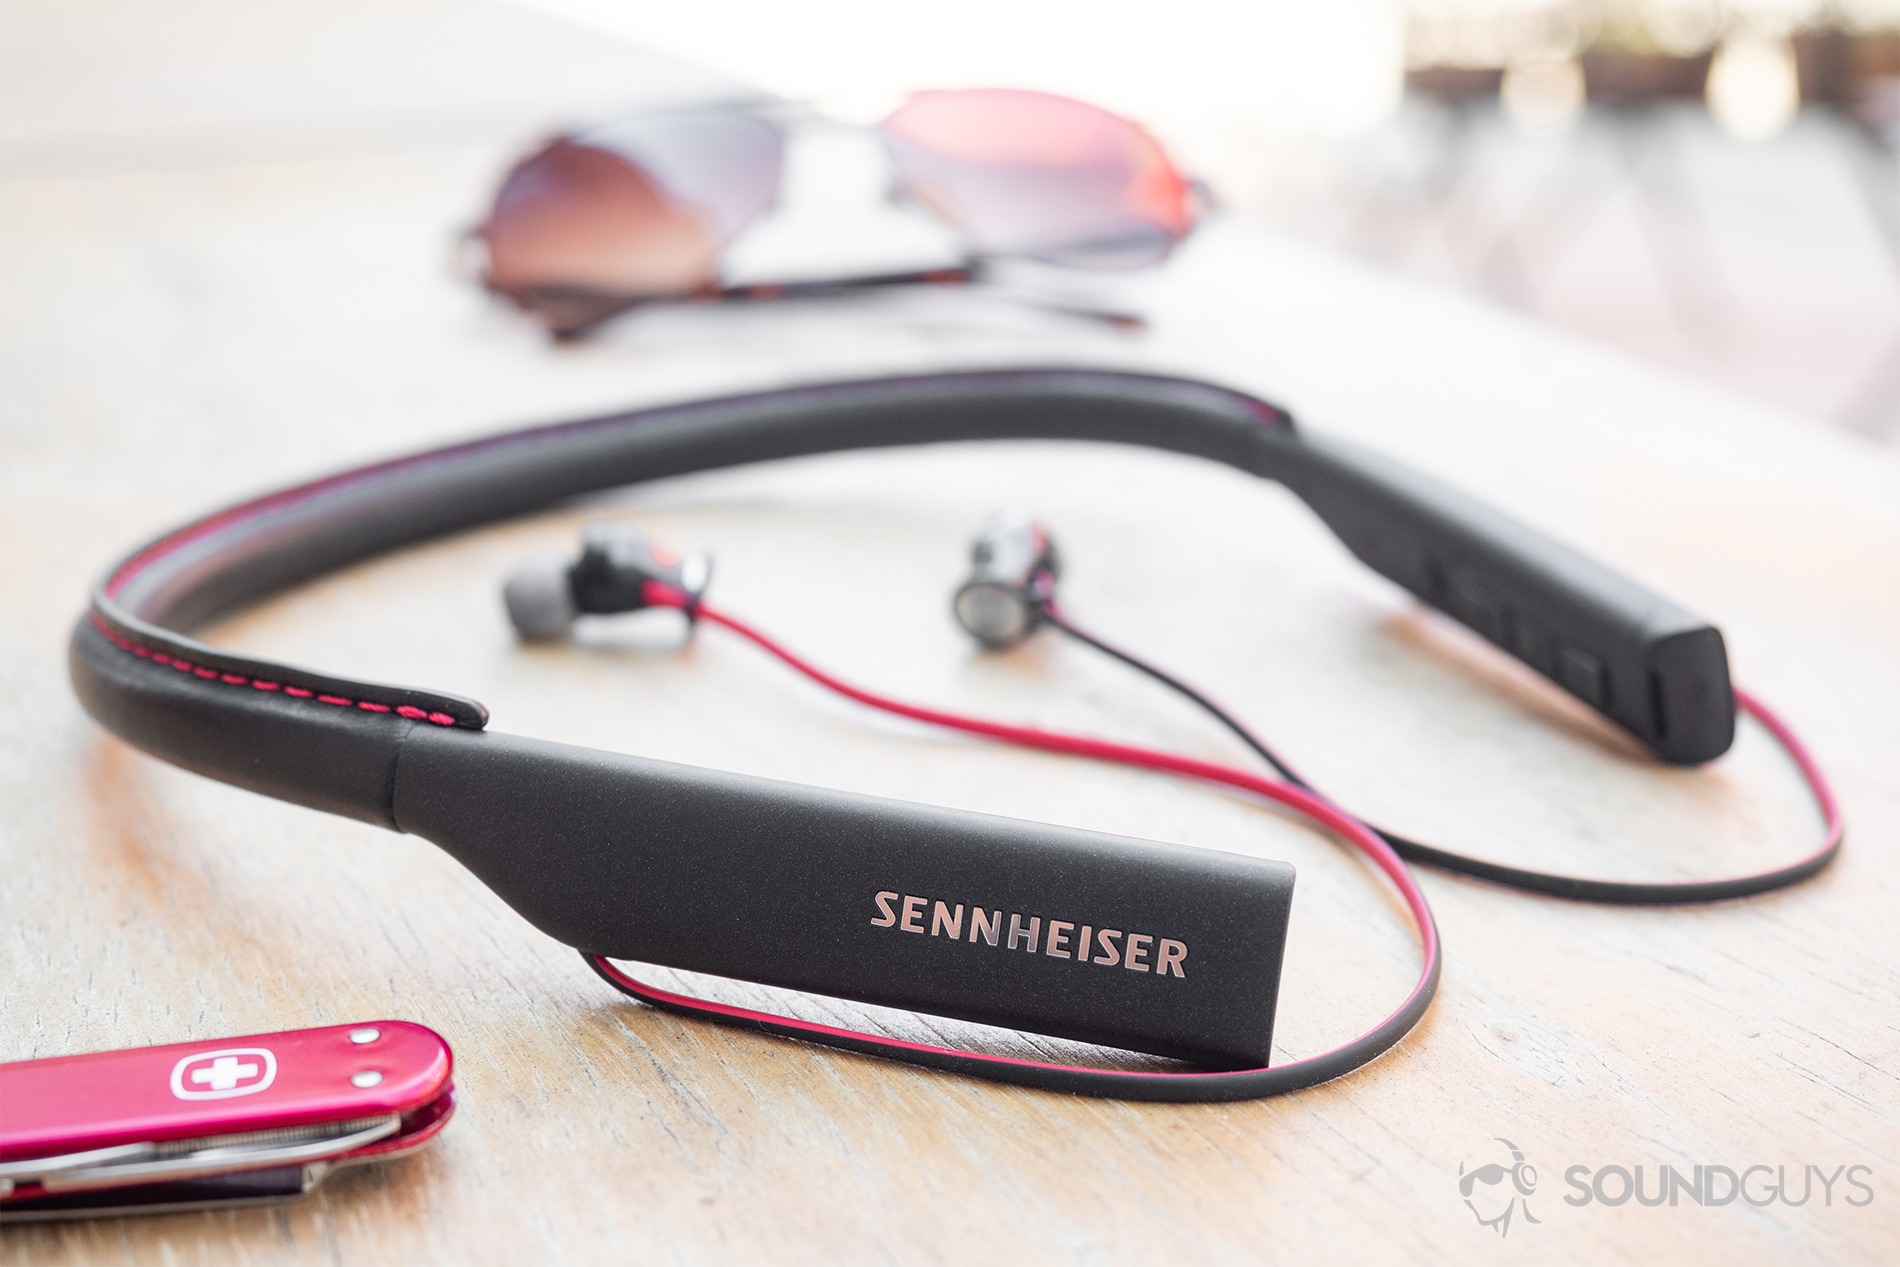 Are Beats worth it? Sennheiser HD1 In-Ear Wireless earbuds on a wooden table with a Swiss Army Knife in the foreground and sunglasses in the background.